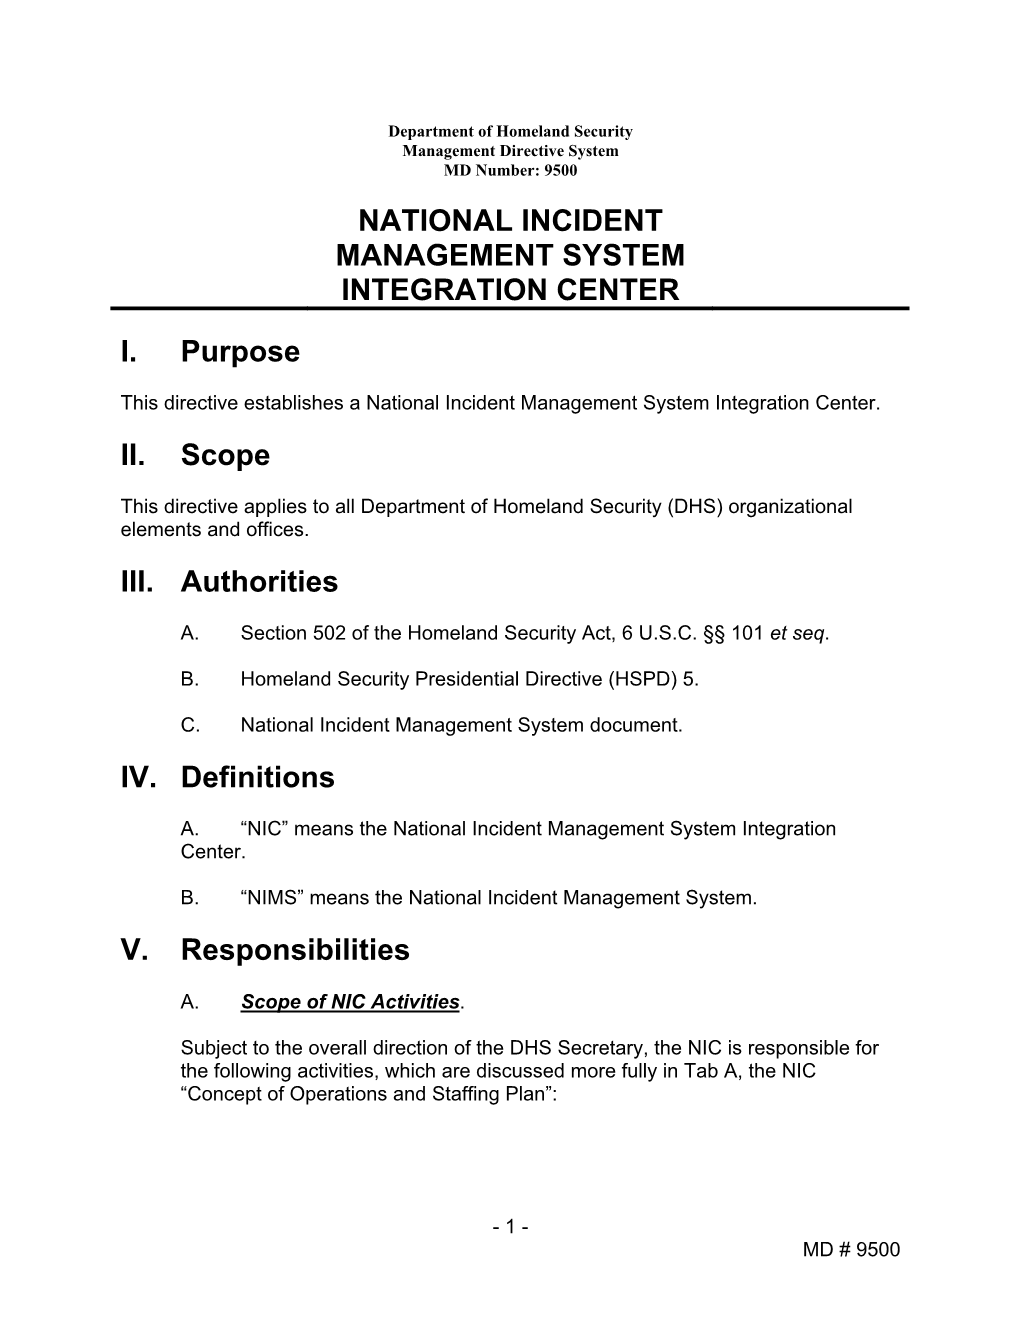 US Department of Homeland Security, Directive 9500, National